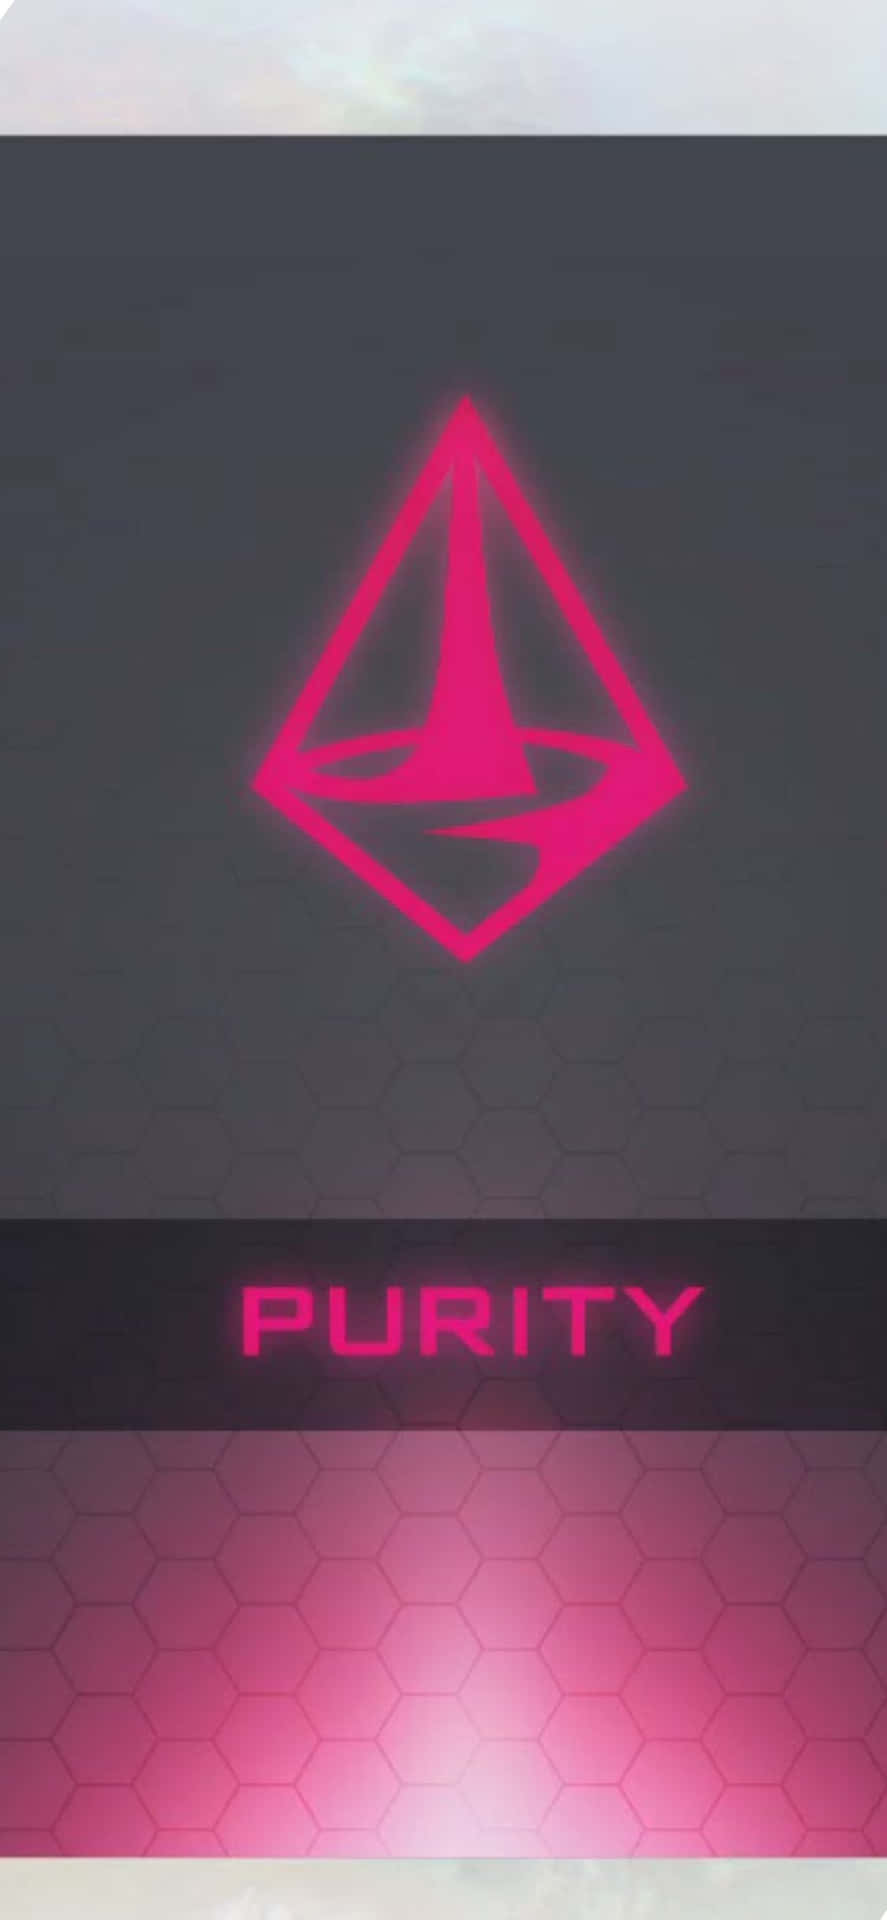 iPhone XS Civilization Beyond Earth Pink Purity Emblem Background